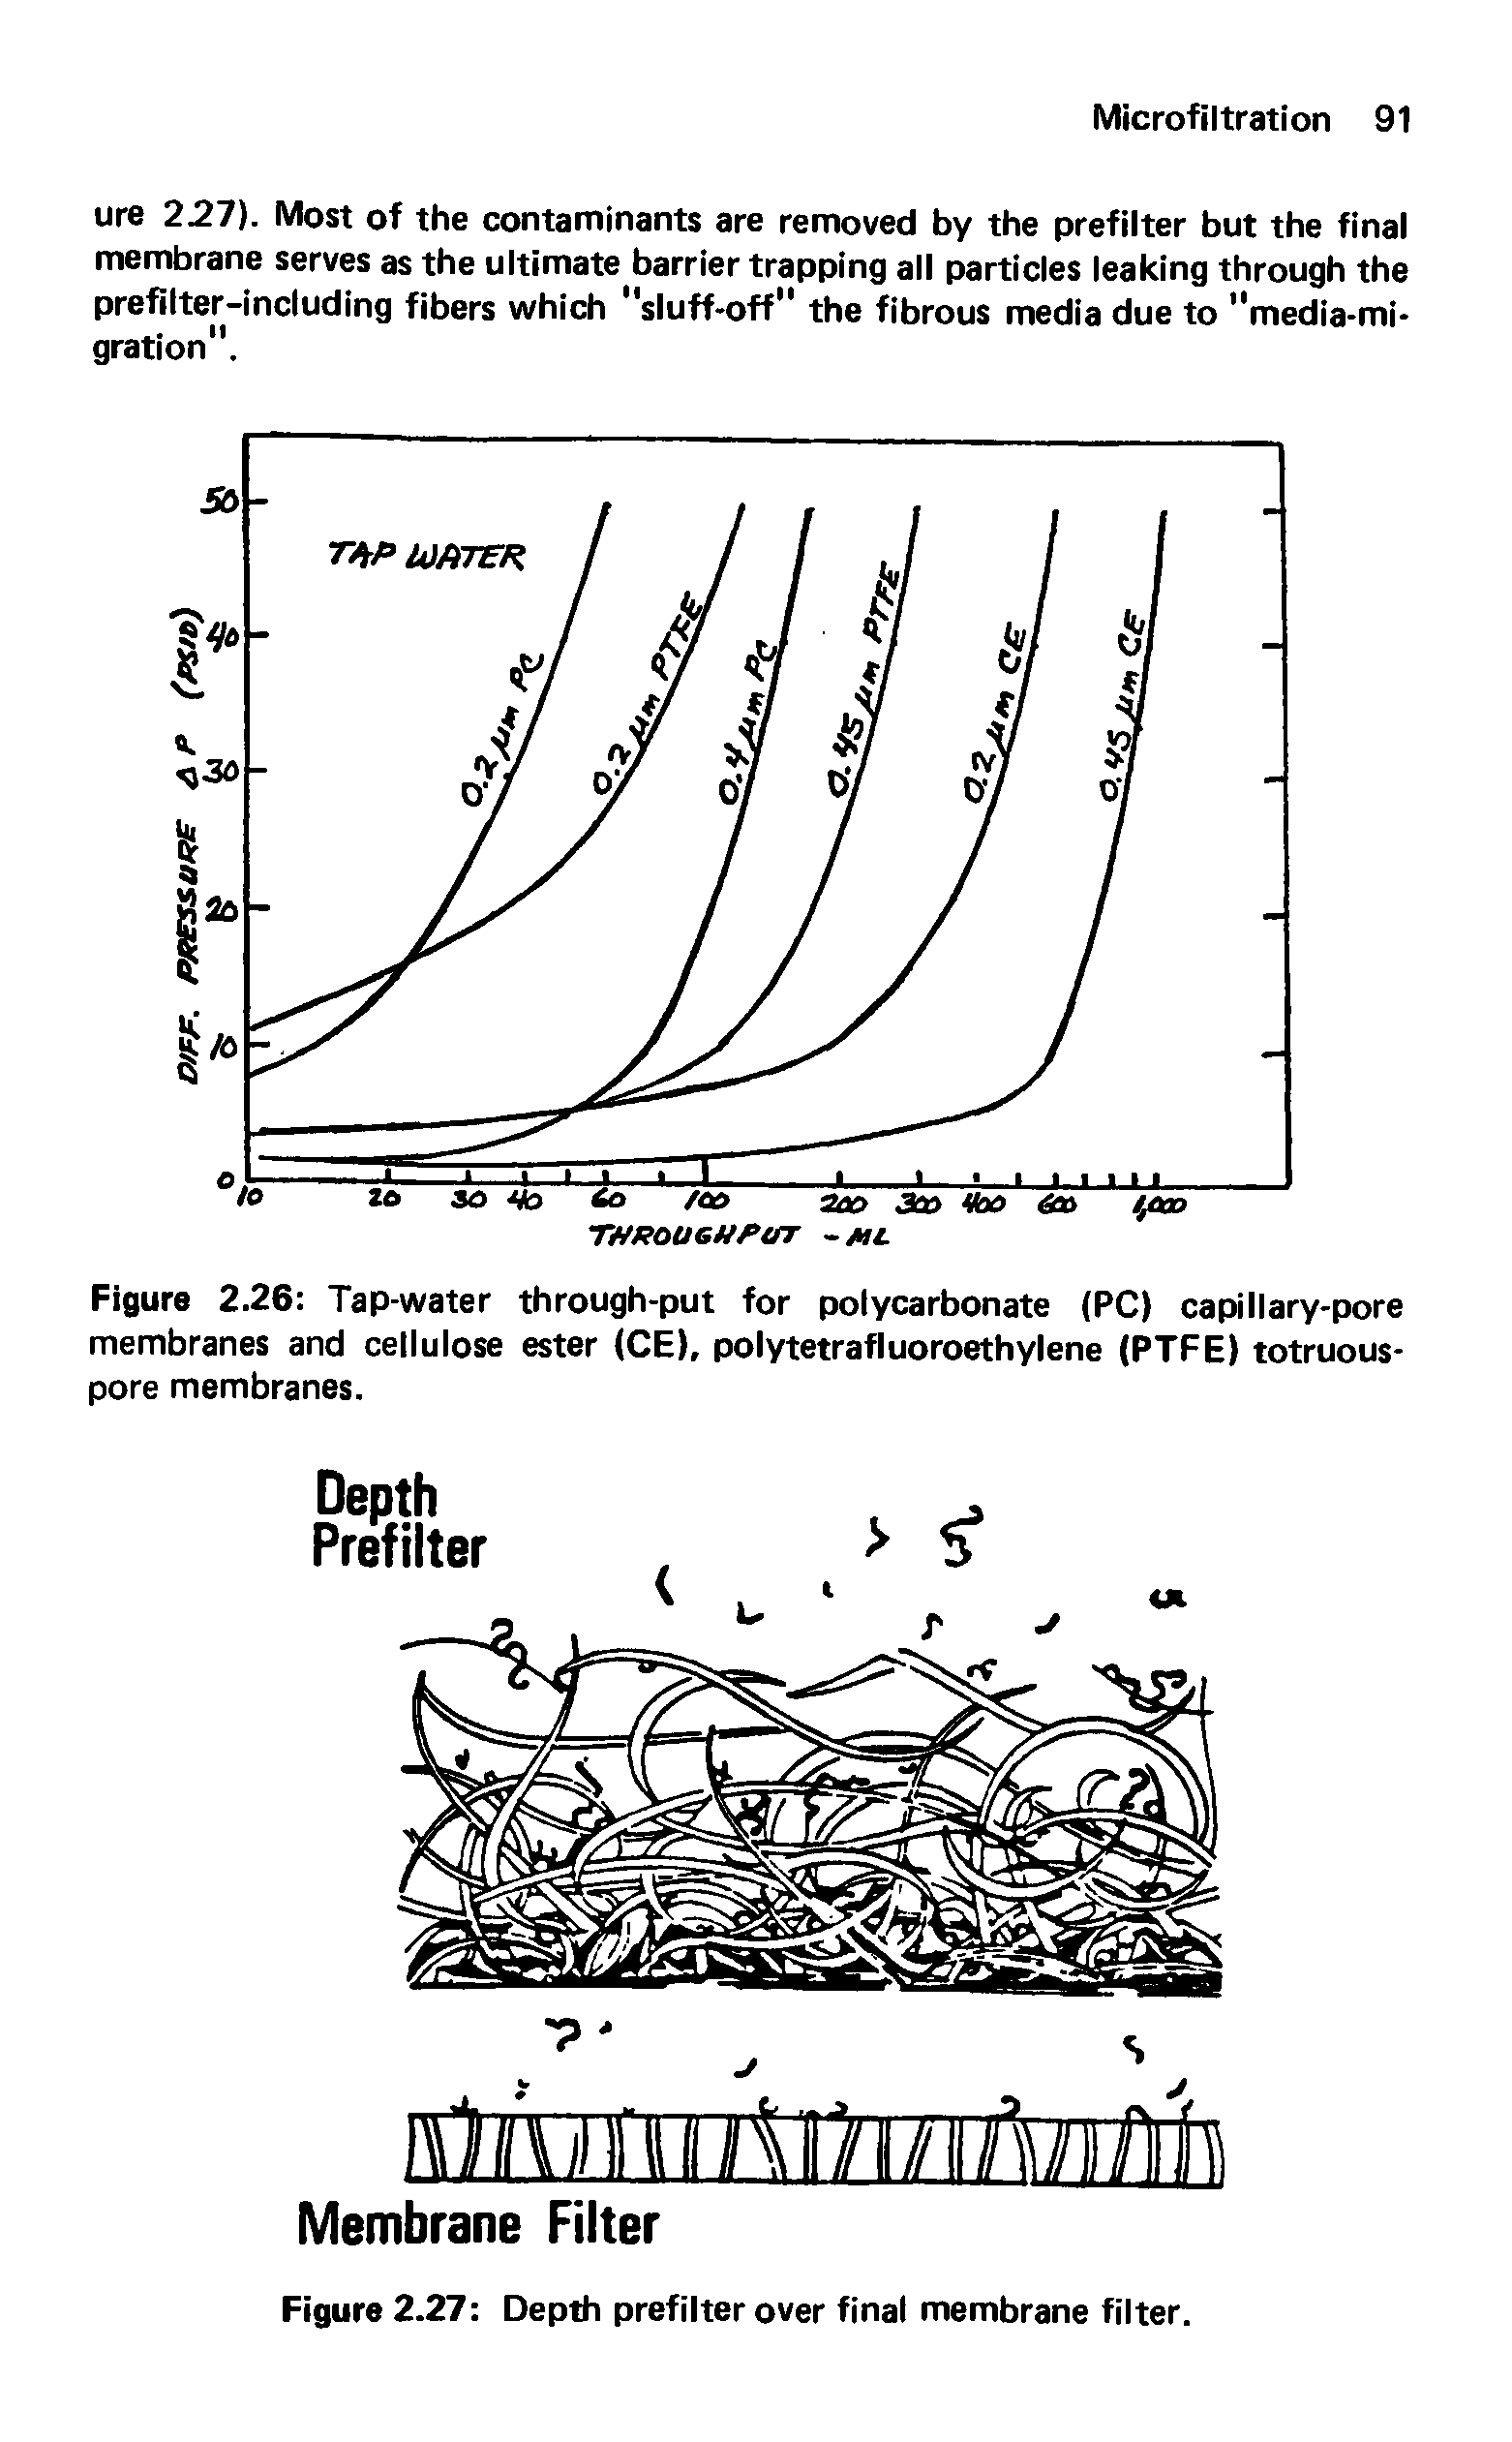 Figure 2.26 Tap-water through-put for polycarbonate (PC) capillary-pore membranes and cellulose ester (CE), polytetrafluoroethylene (PTFE) totruous-pore membranes.